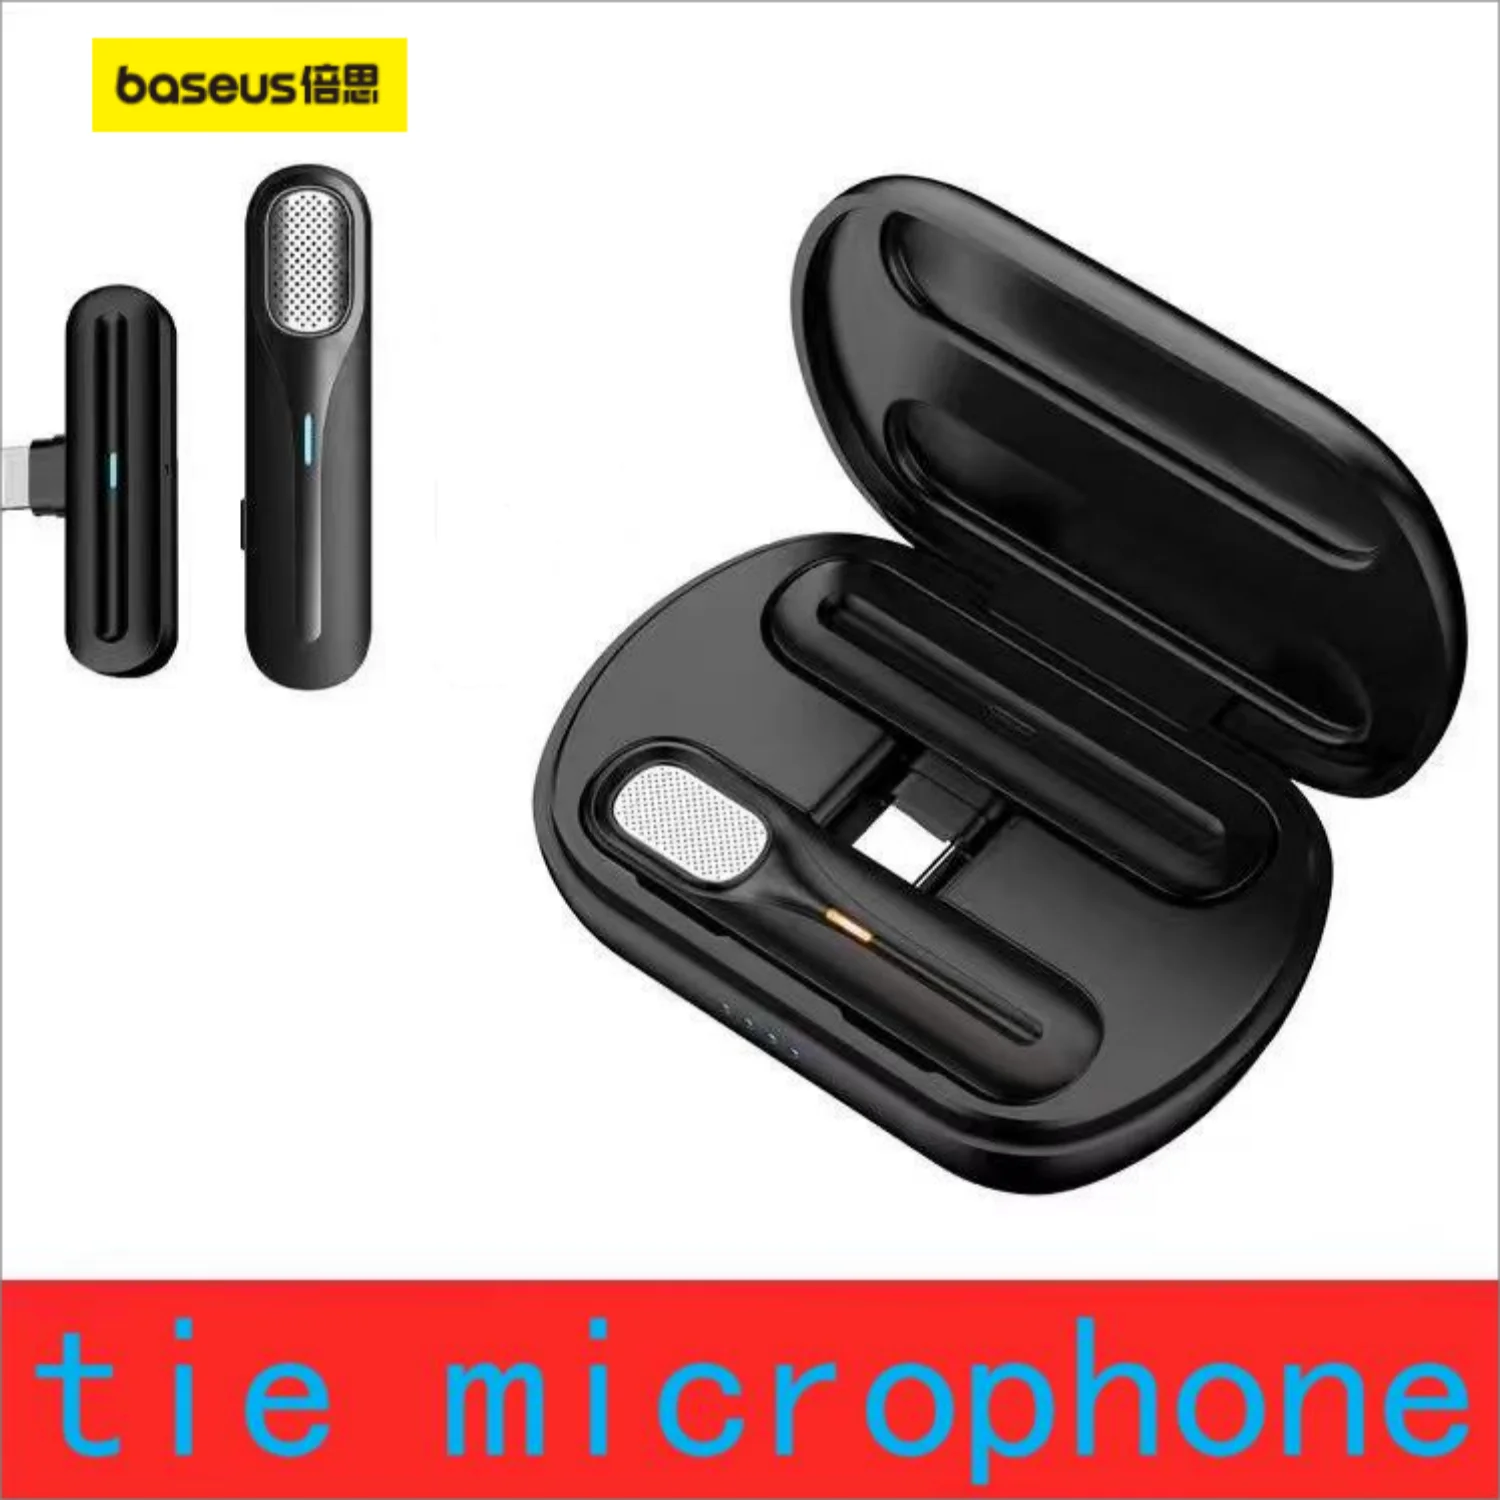 

Wireless Mini Lavalier Microphone Set Outdoor Two-Way Monitoring HD Voice Pickup Mobile Phone Camera Live Recording